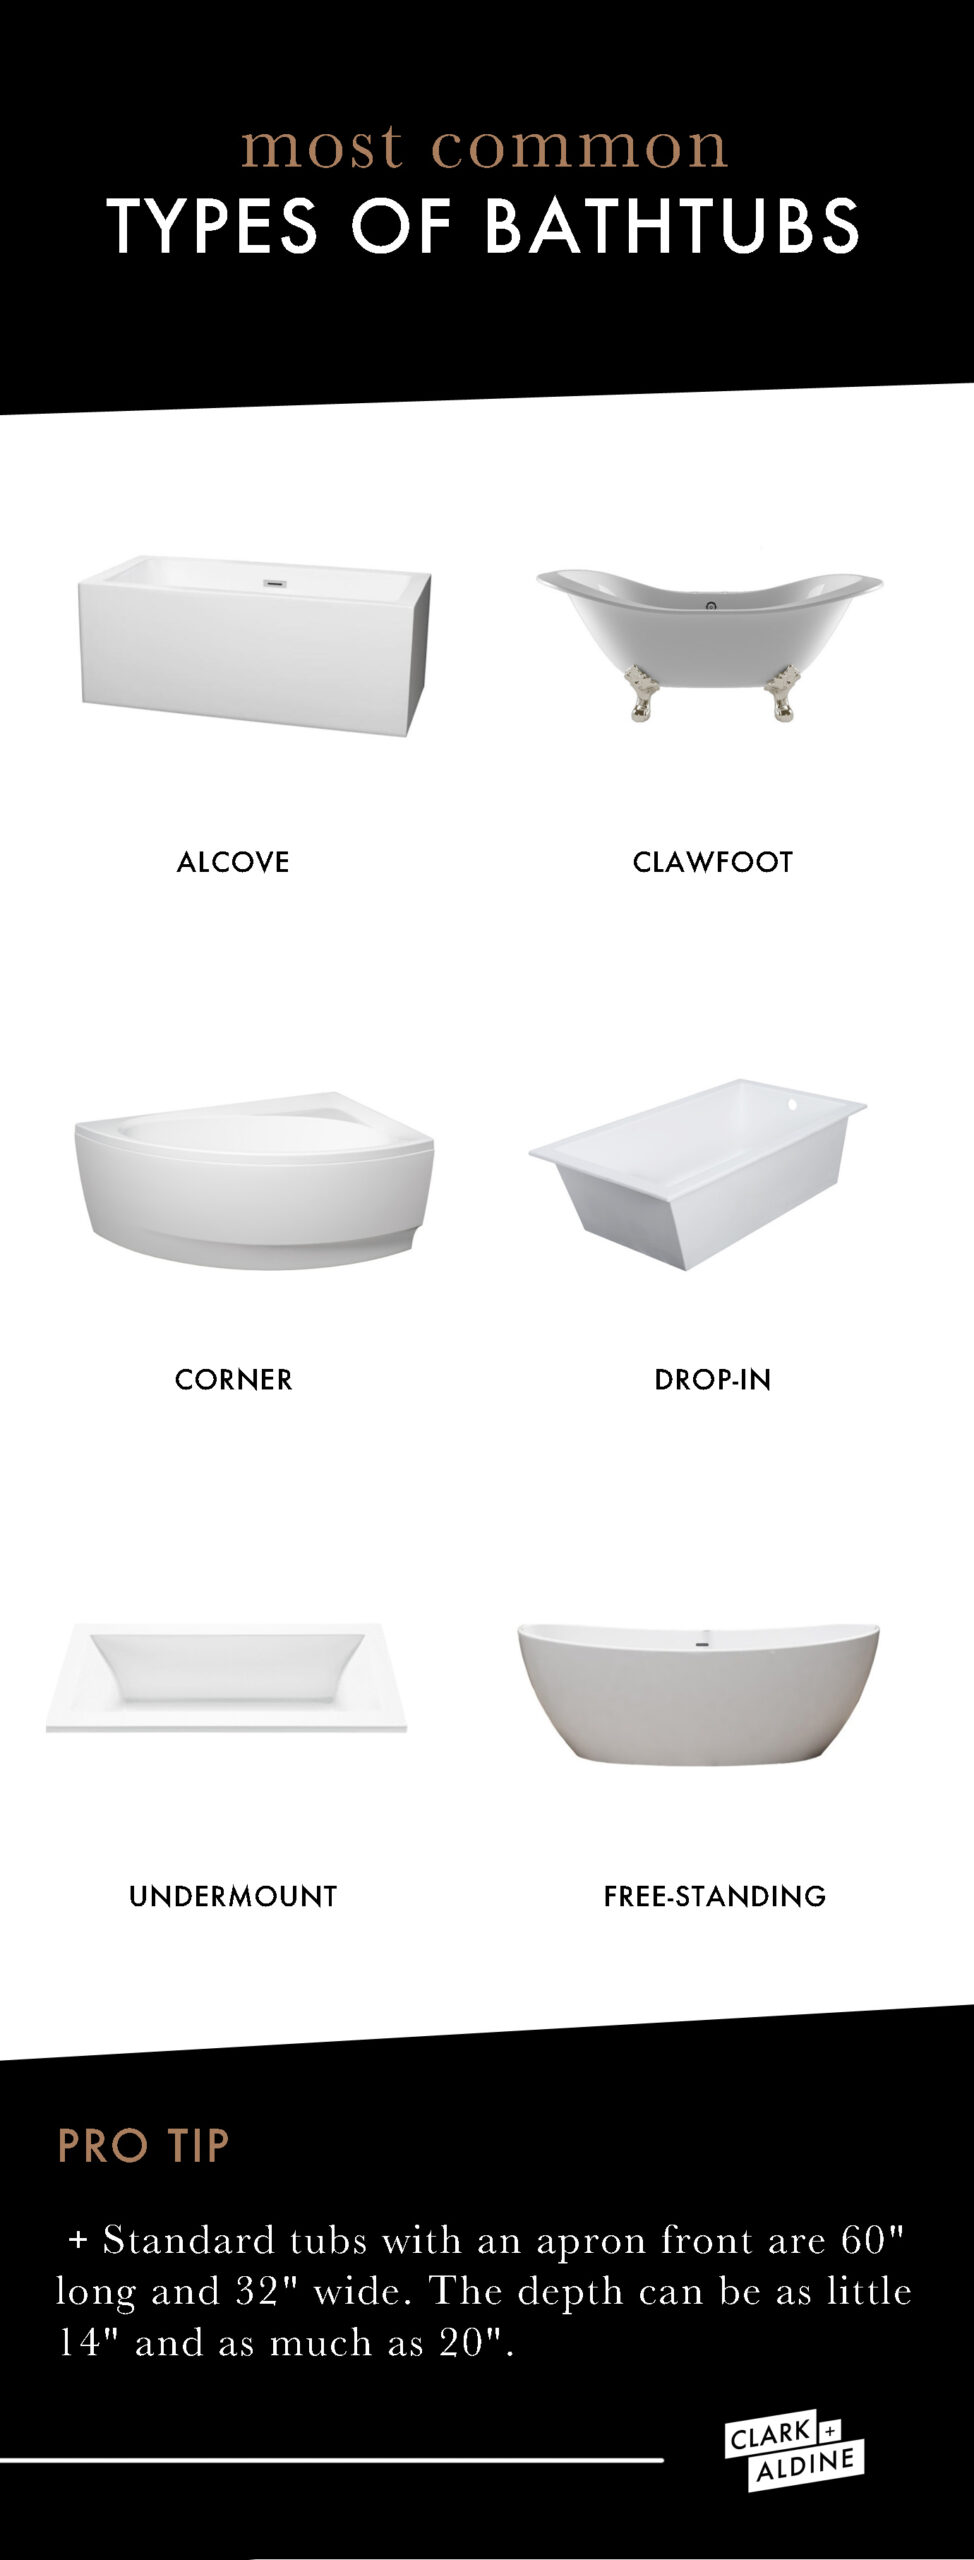 5 MOST COMMON TYPES OF BATHTUBS image 1